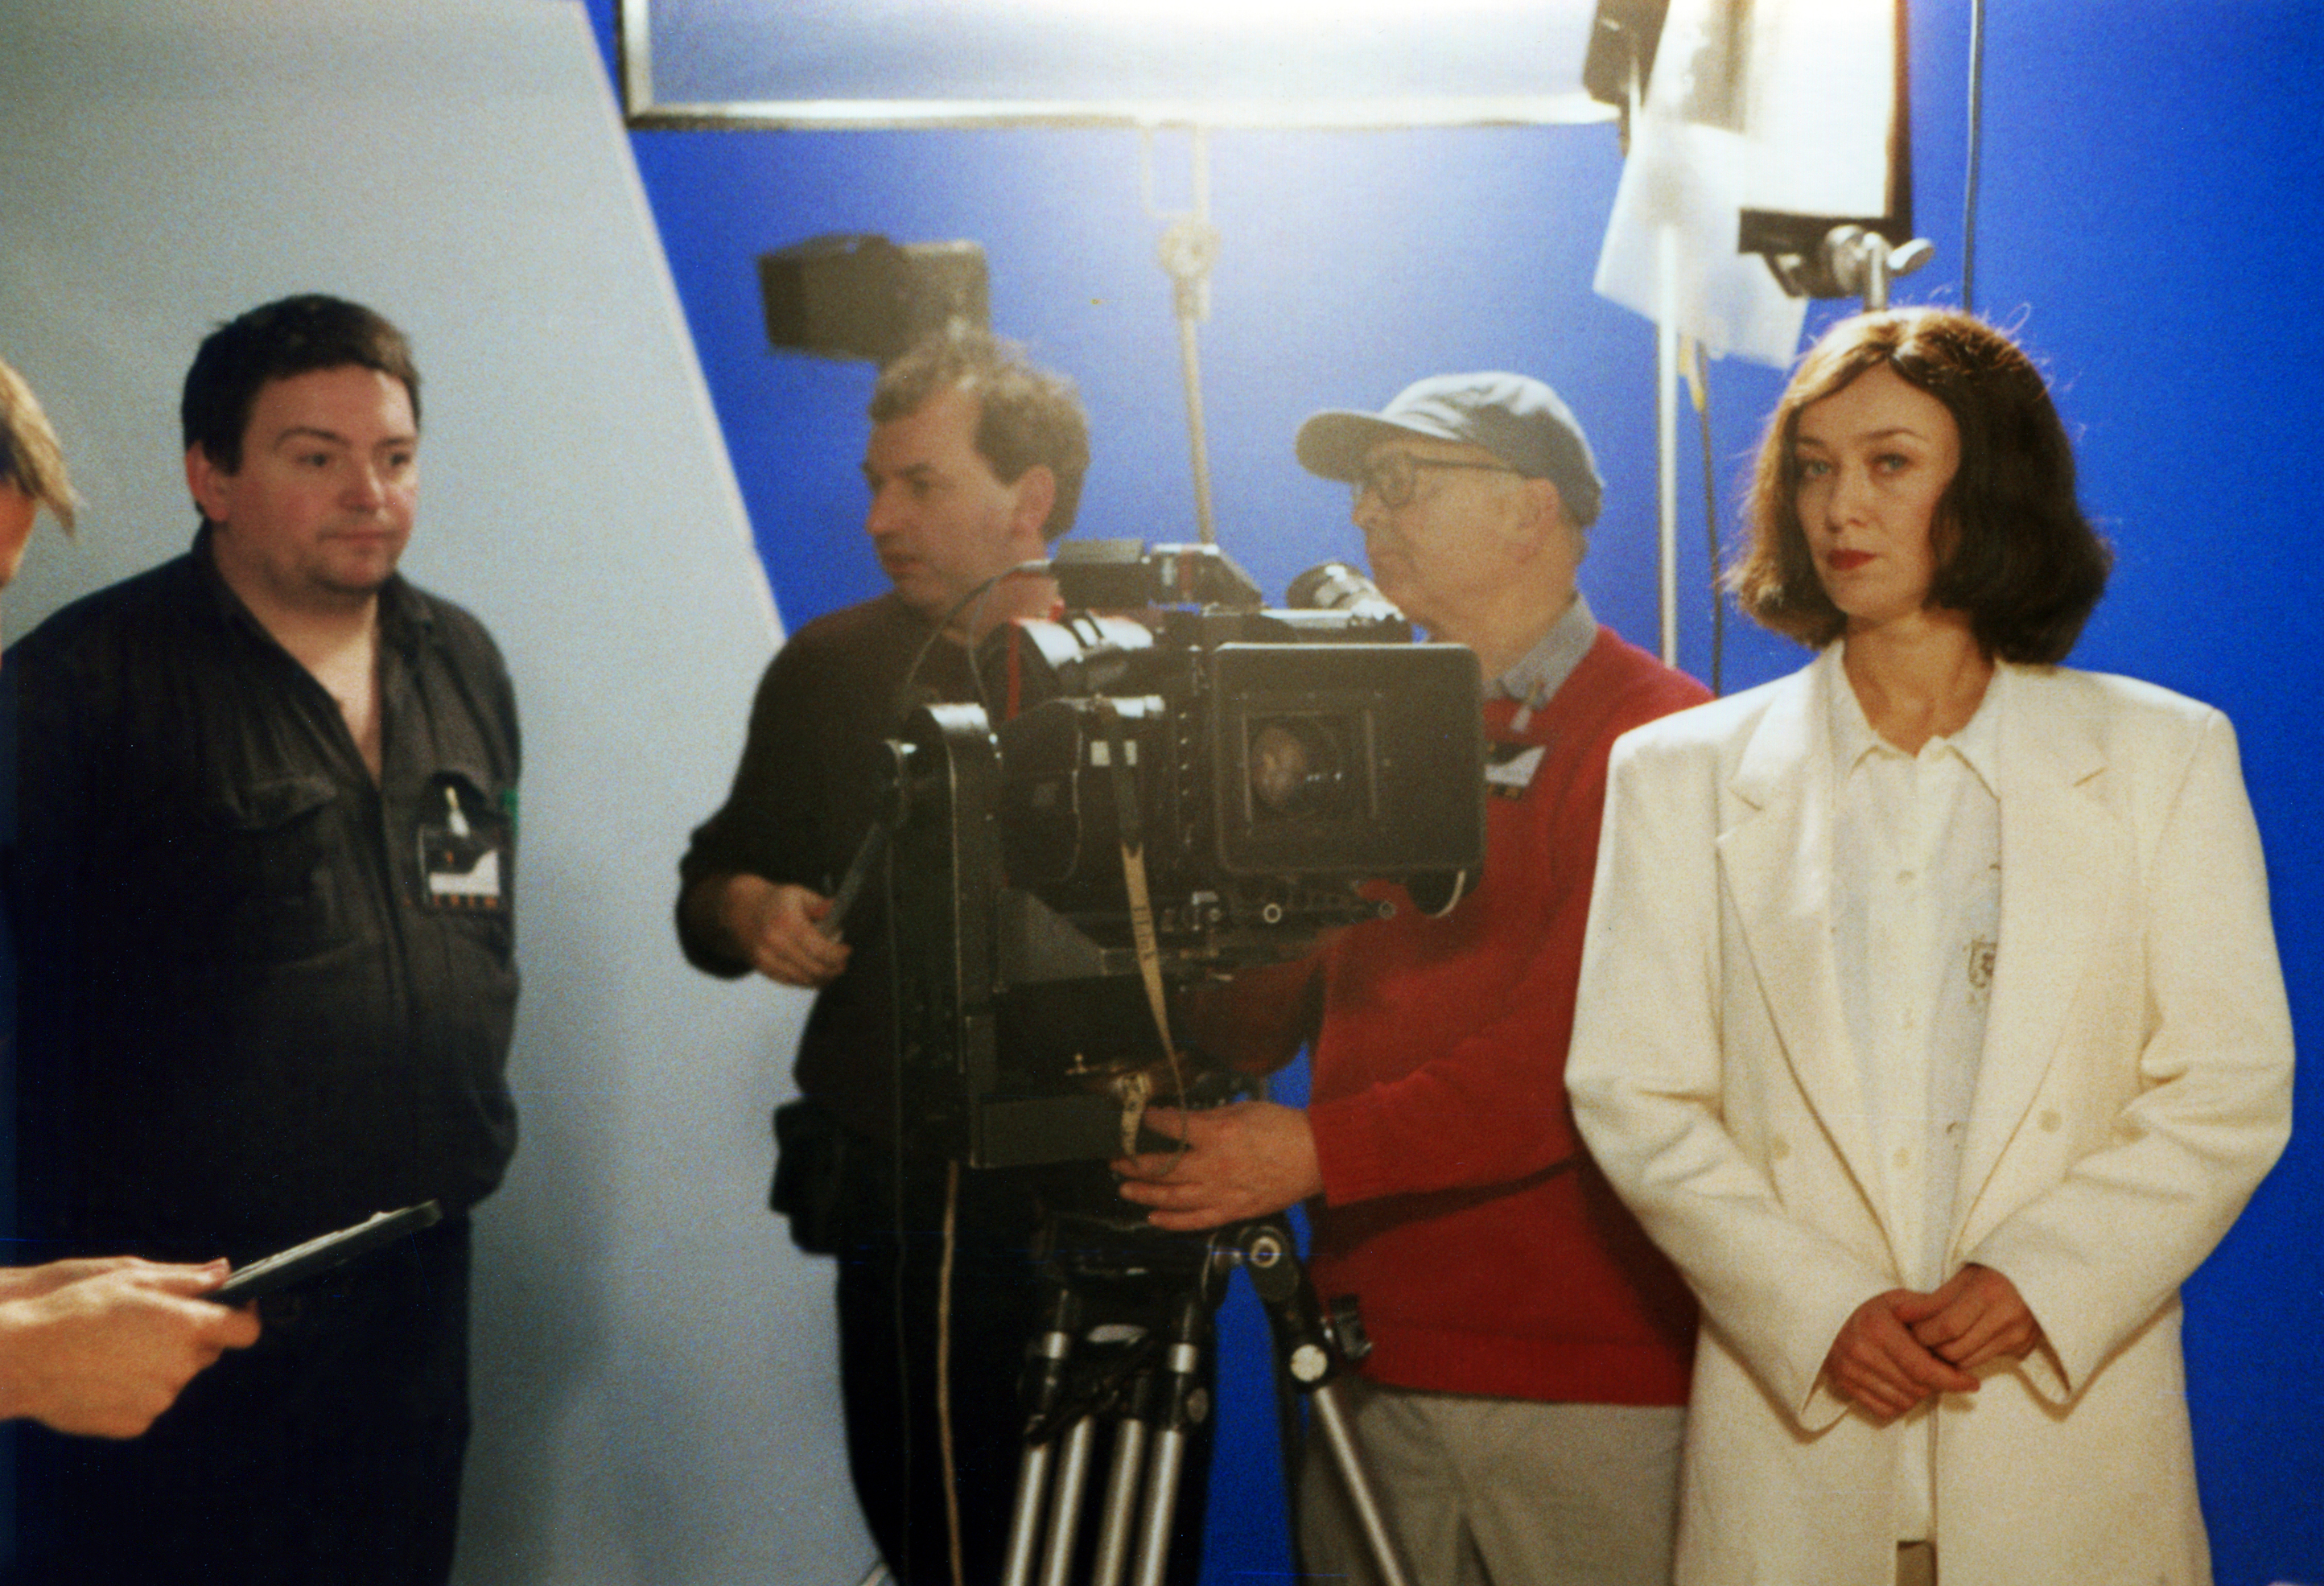 Jim filming pick ups with Portia Booroff and crew in a London studio.